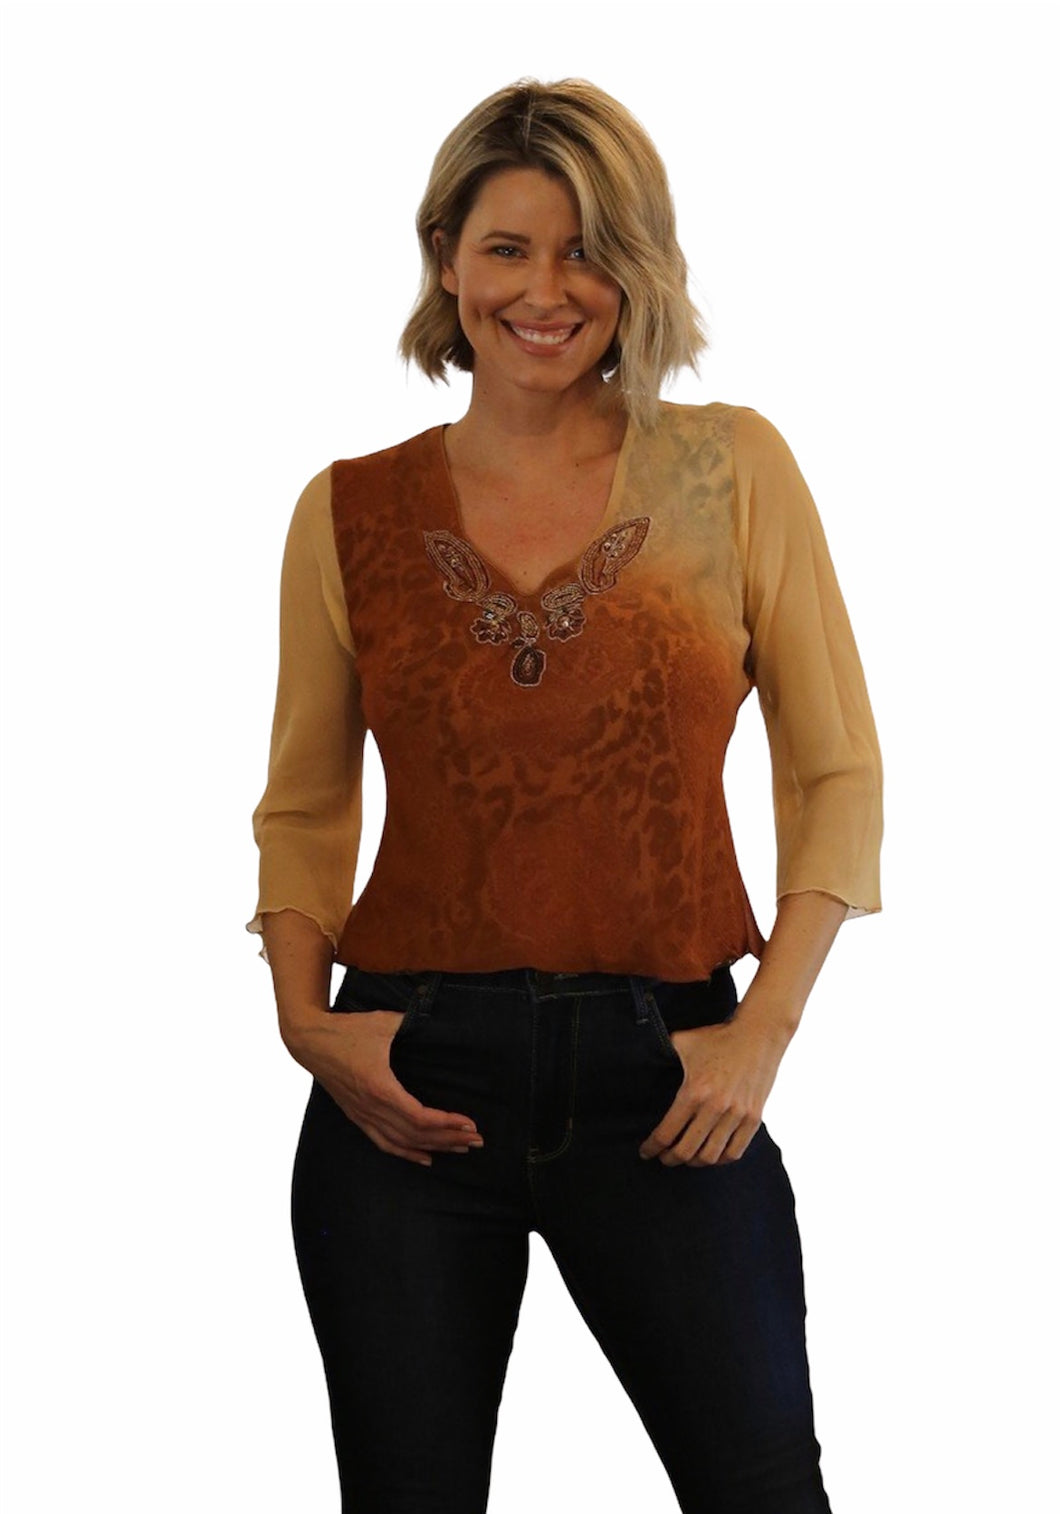 Sheer Top with Embellishment V-Neck Top.